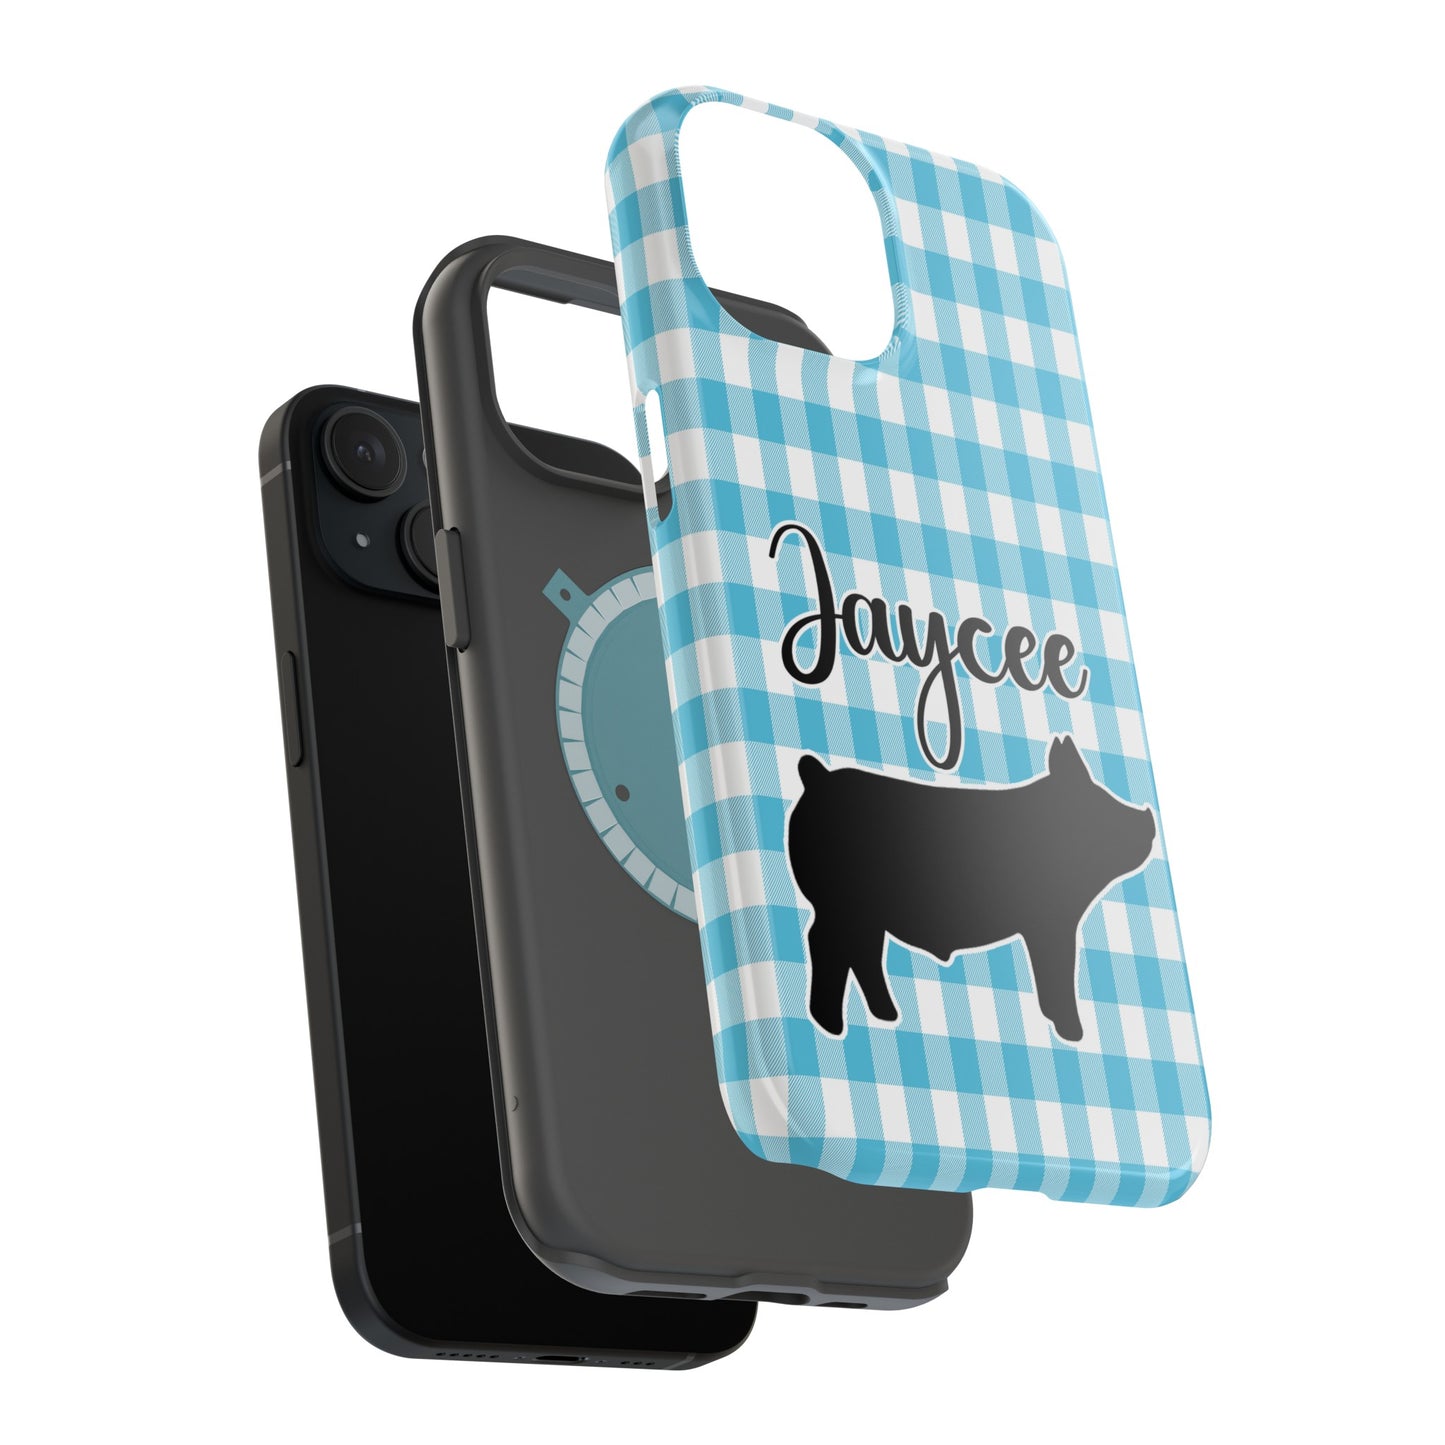 MagSafe iPhone Cases - Livestock Show Pig - iPhone Pig Phone Cases